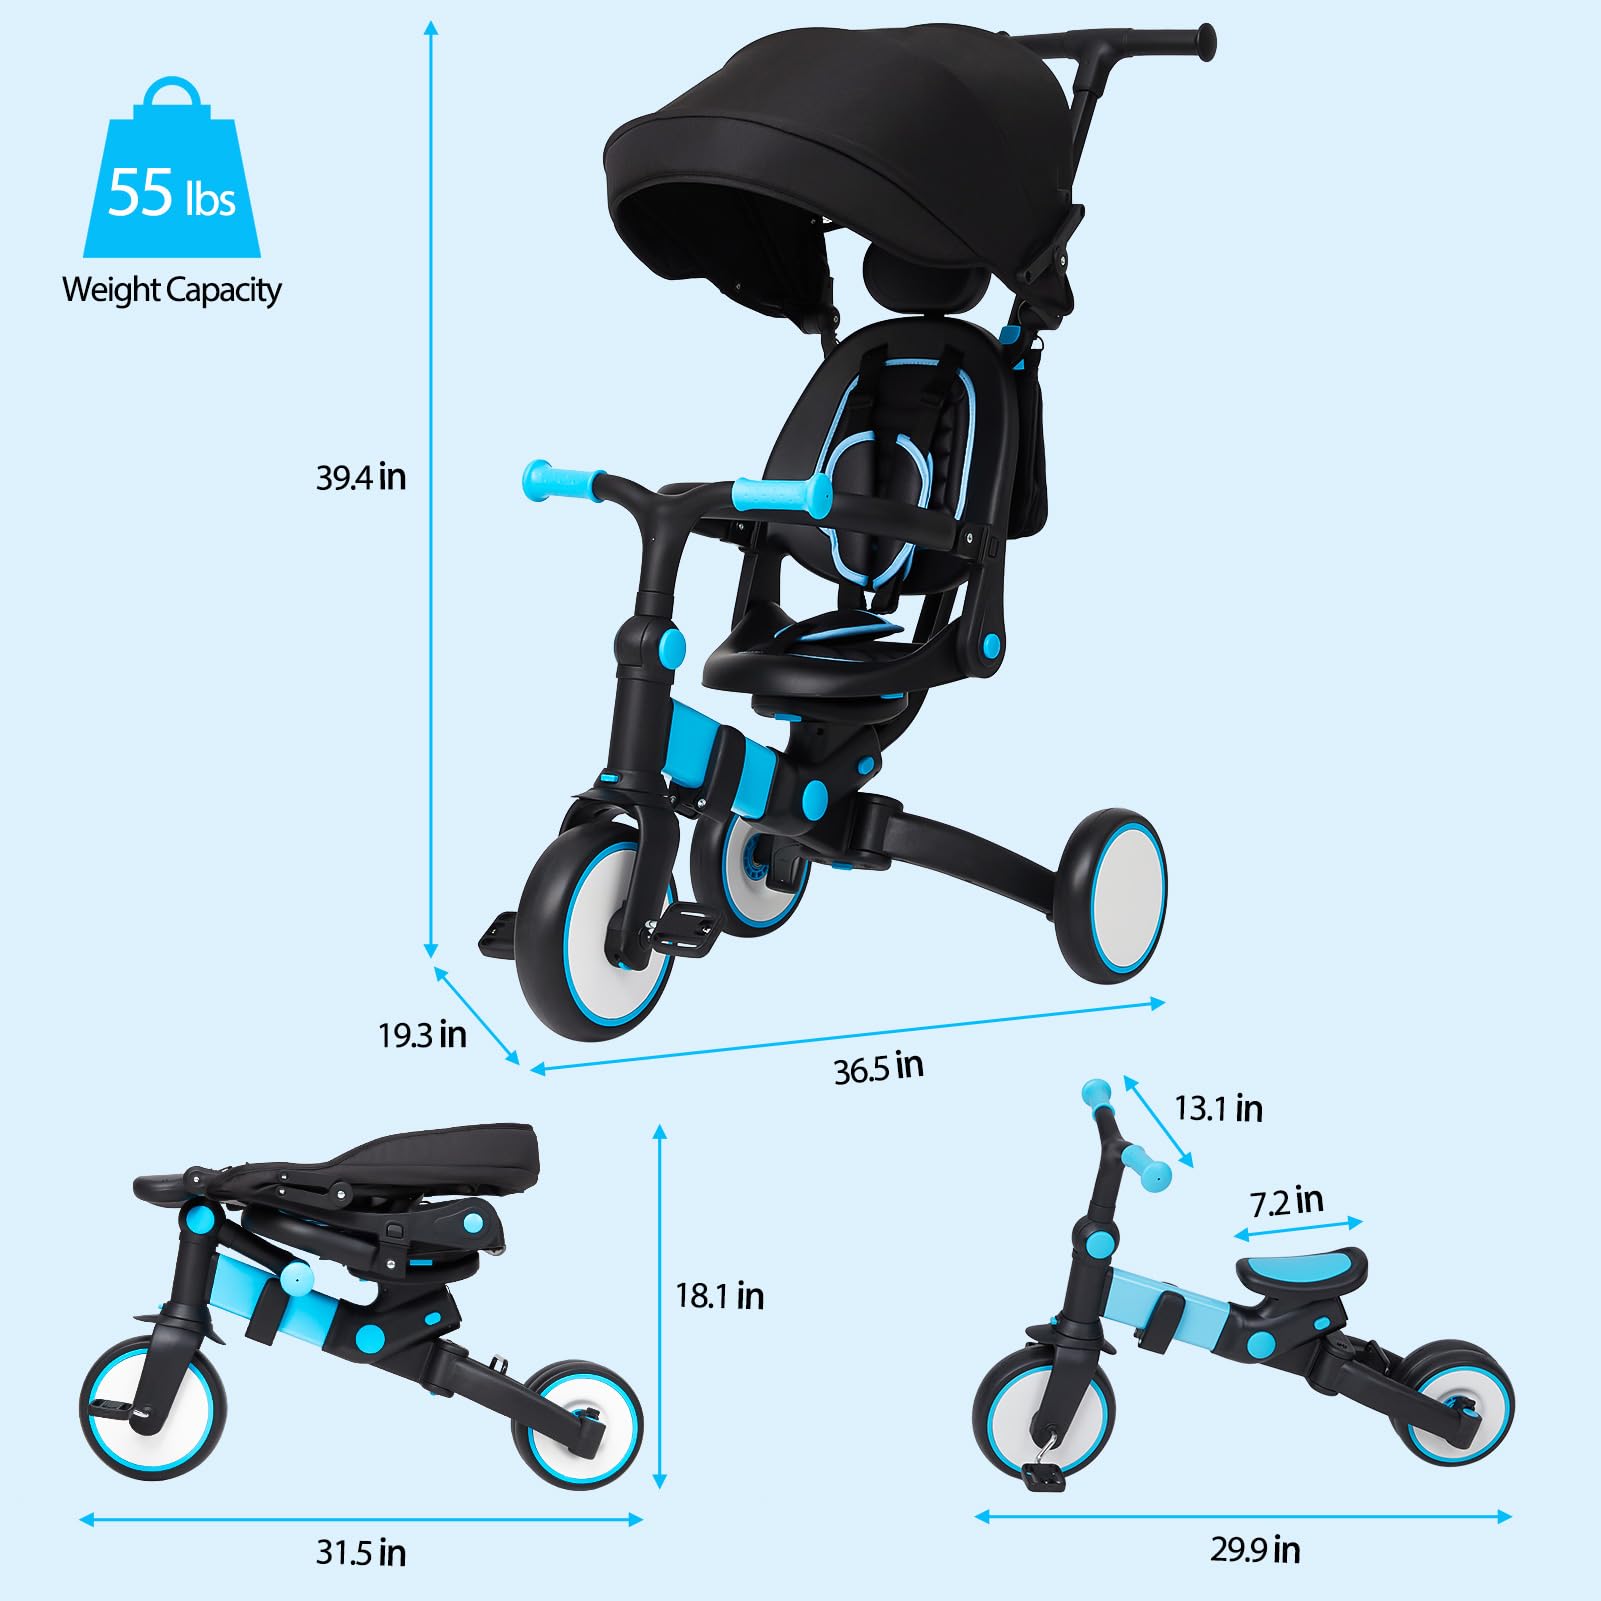 GAOMON 7 in 1 Baby Tricycle, Foldable Toddler Tricycle with Removable and Adjustable Parent Handle, Toddler Push Bike with Removable Pedal, Canopy, and Guardrail, Tricycle for 12-72 Months（Blue）